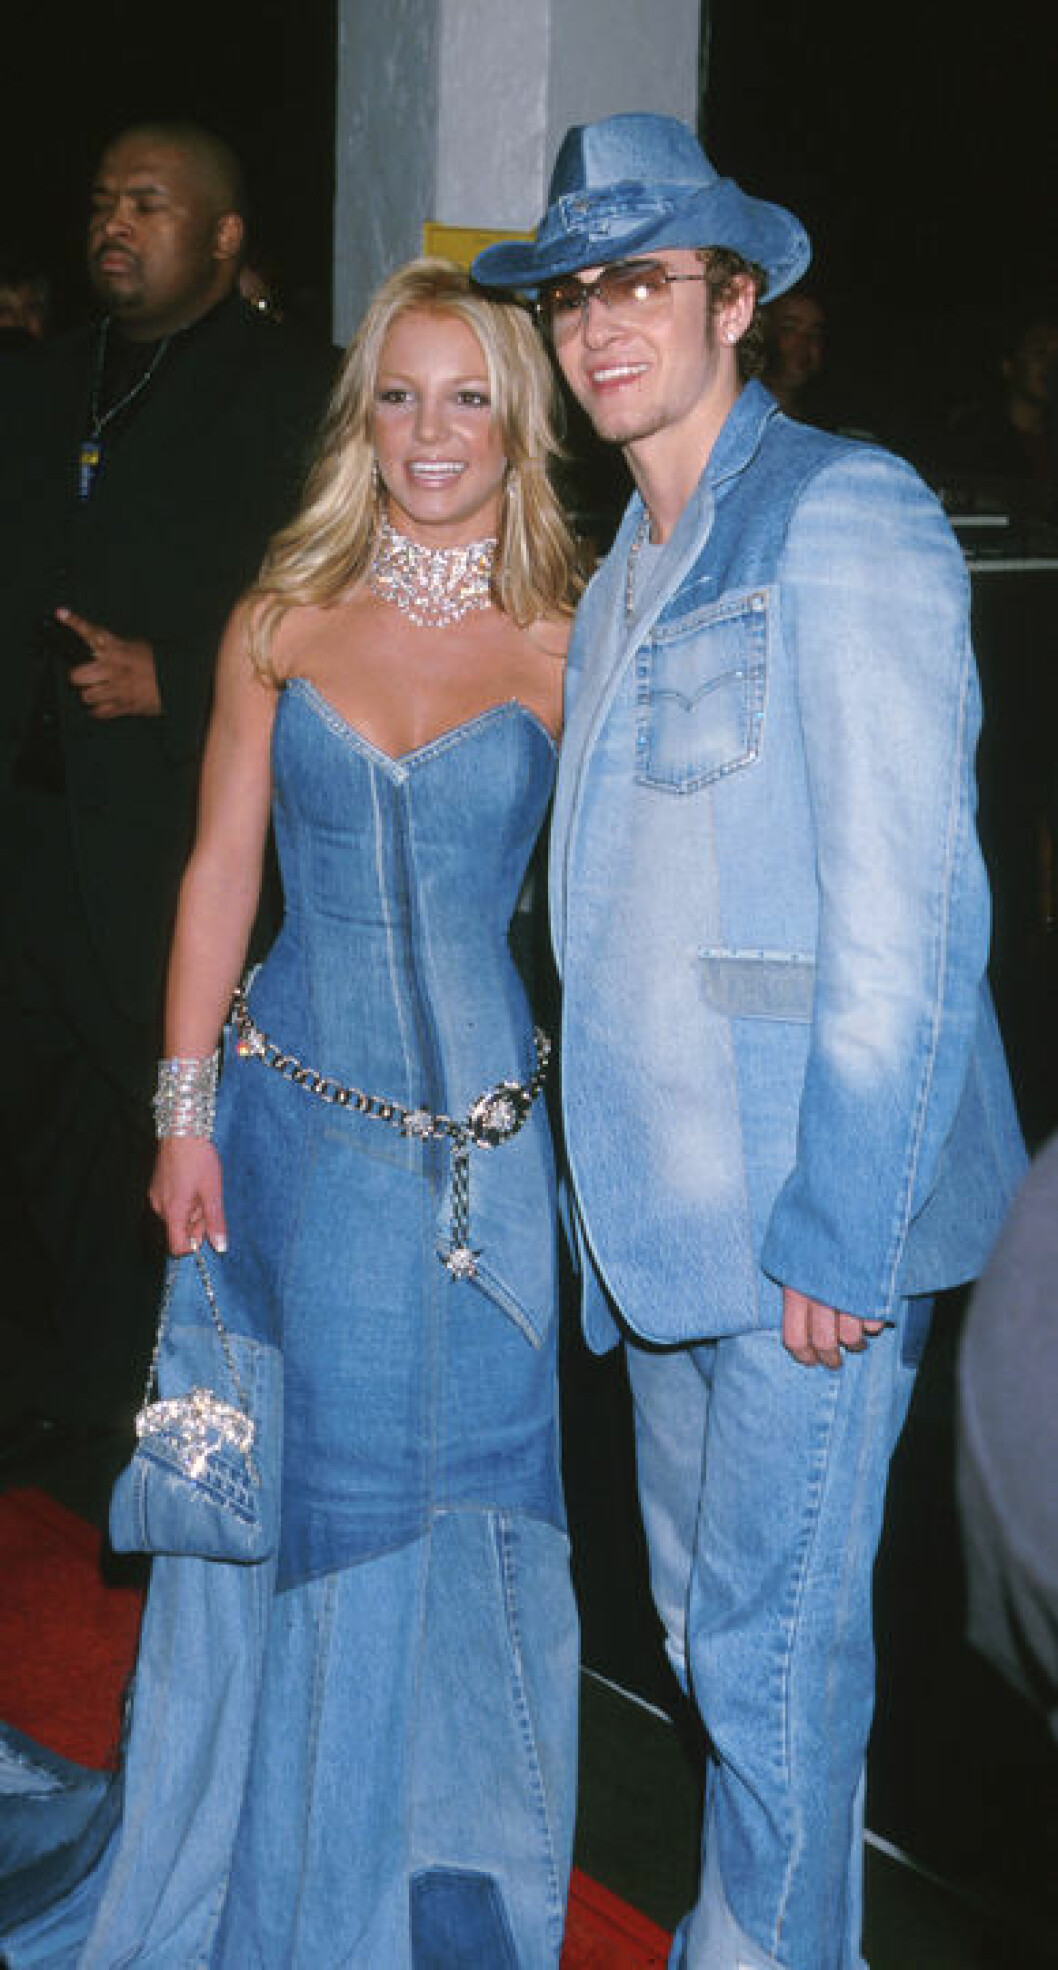 iconic-denim-britney-spears-justin-timberlake-GettyImages-74684774-h724